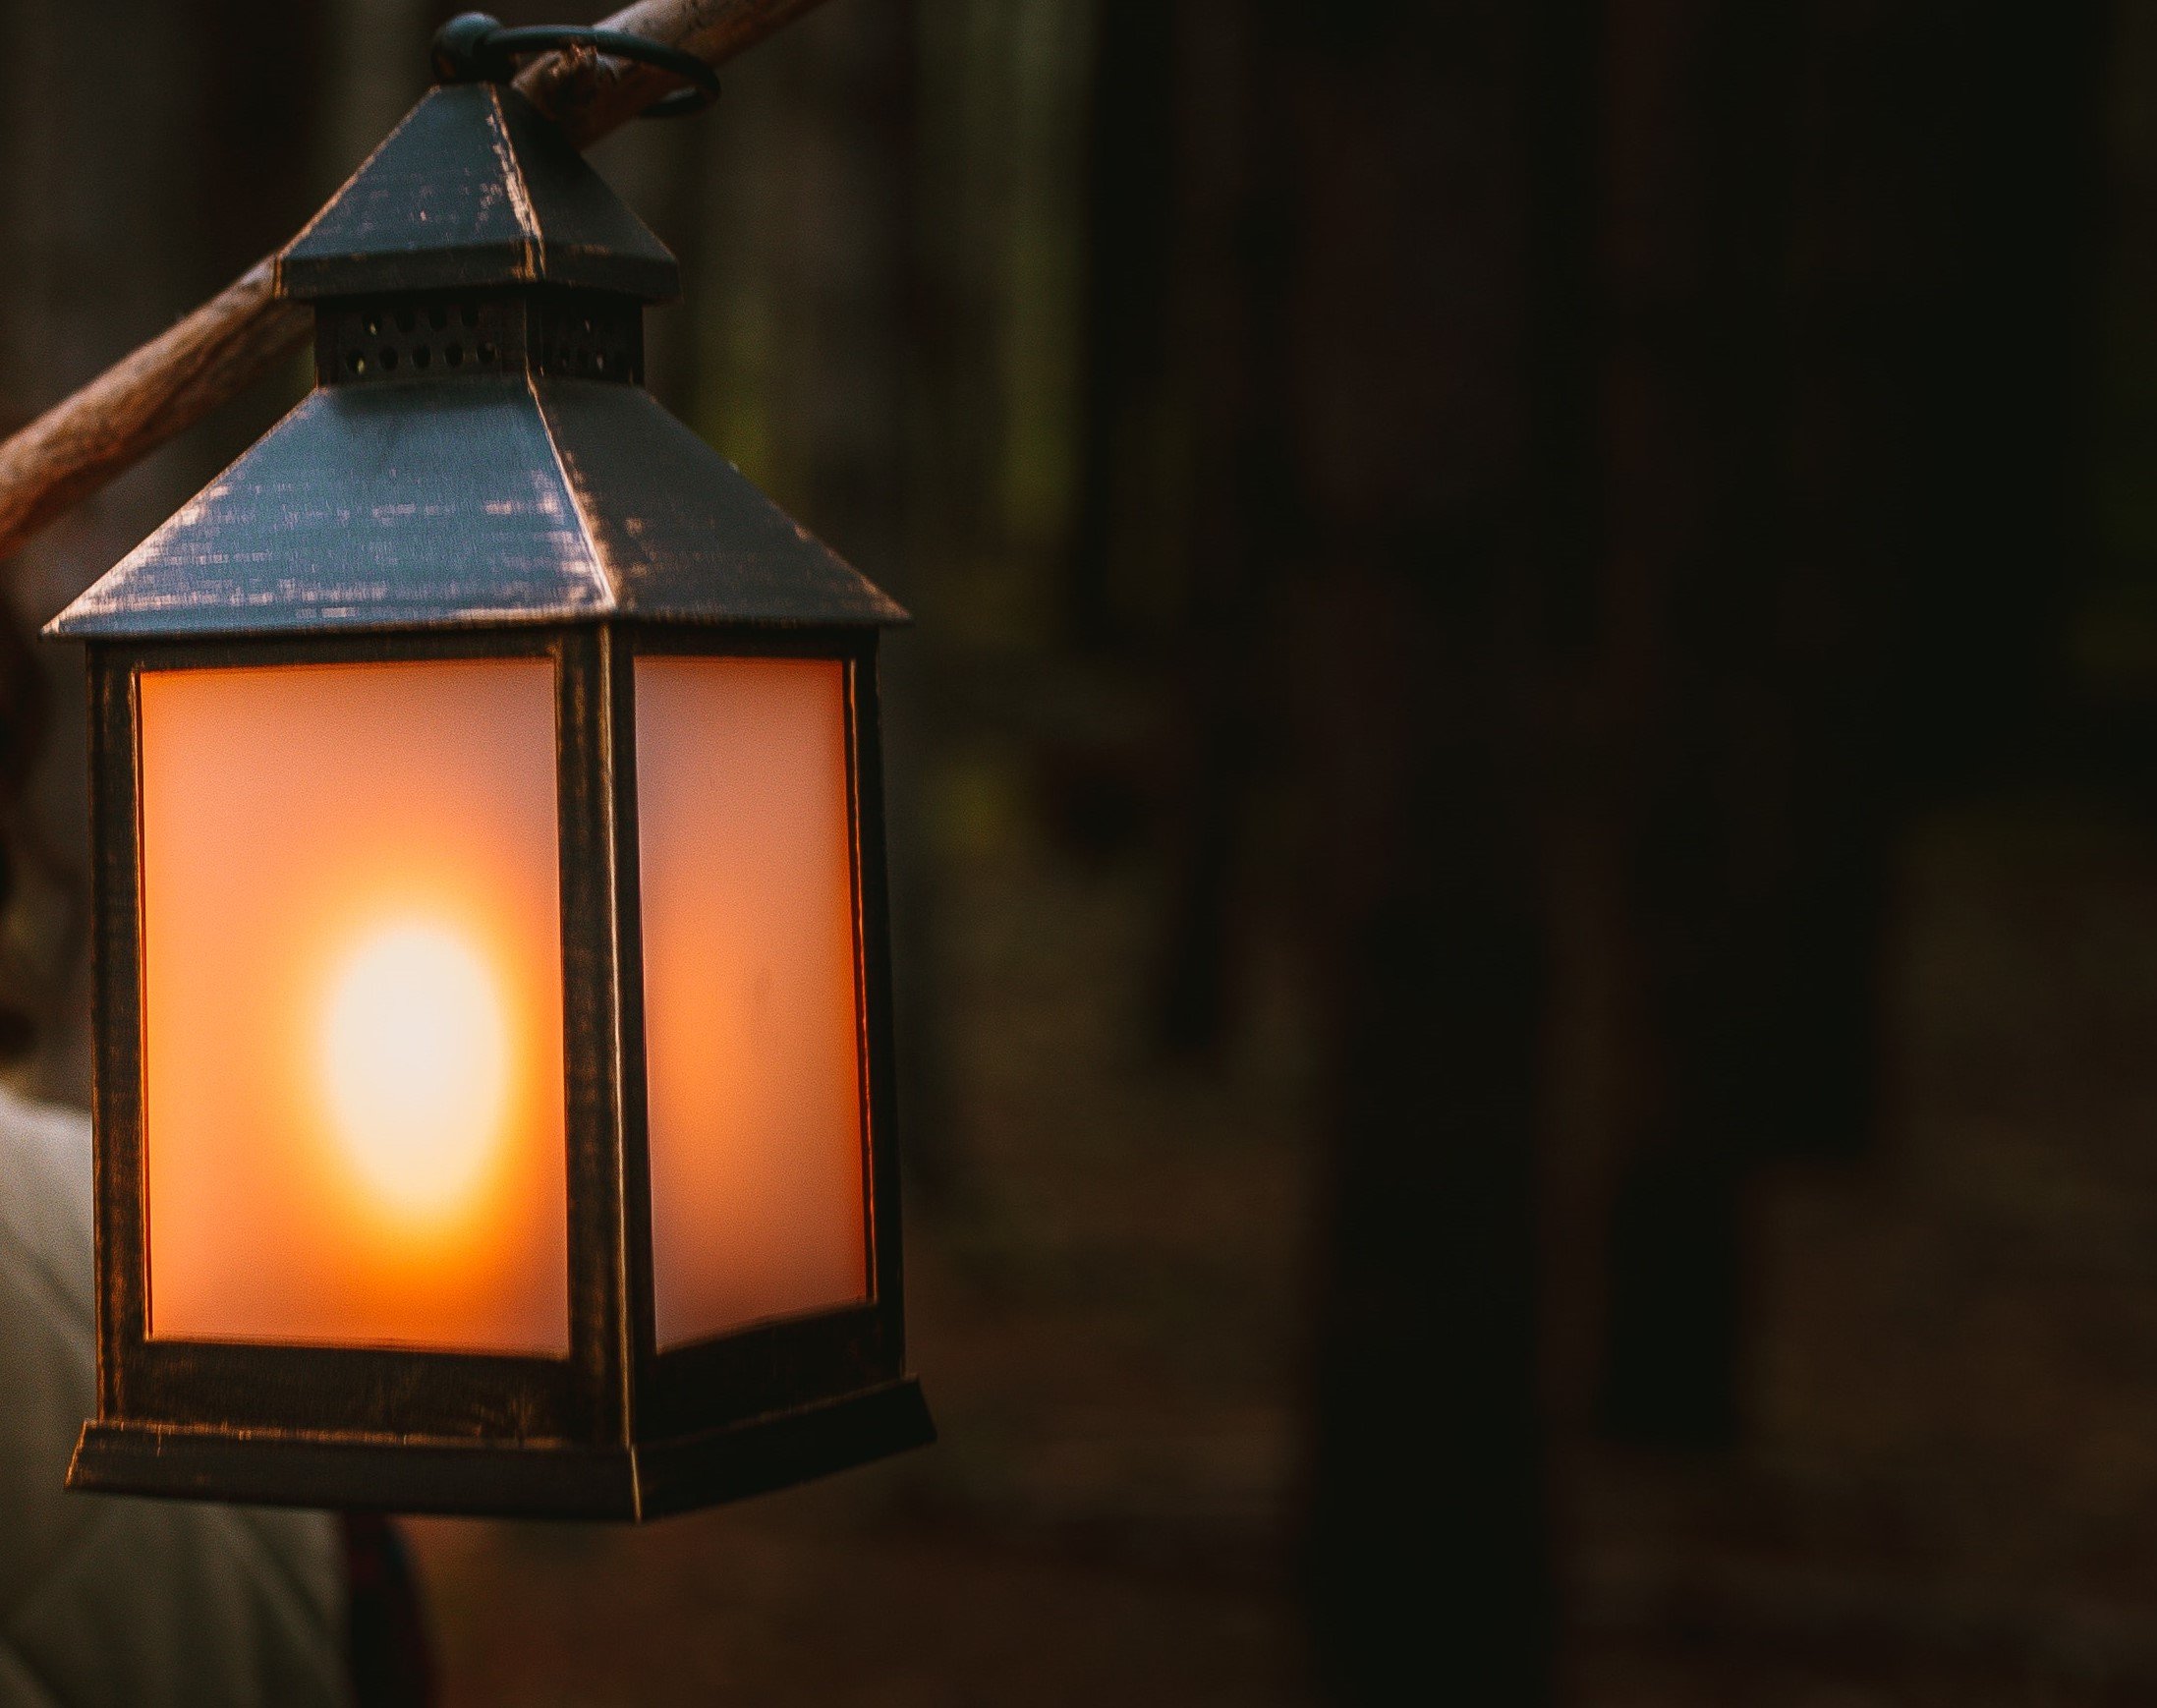 Justin was sure he saw an old lady with a lantern going into the woods, but his parents did not believe him. | Source: Pexels